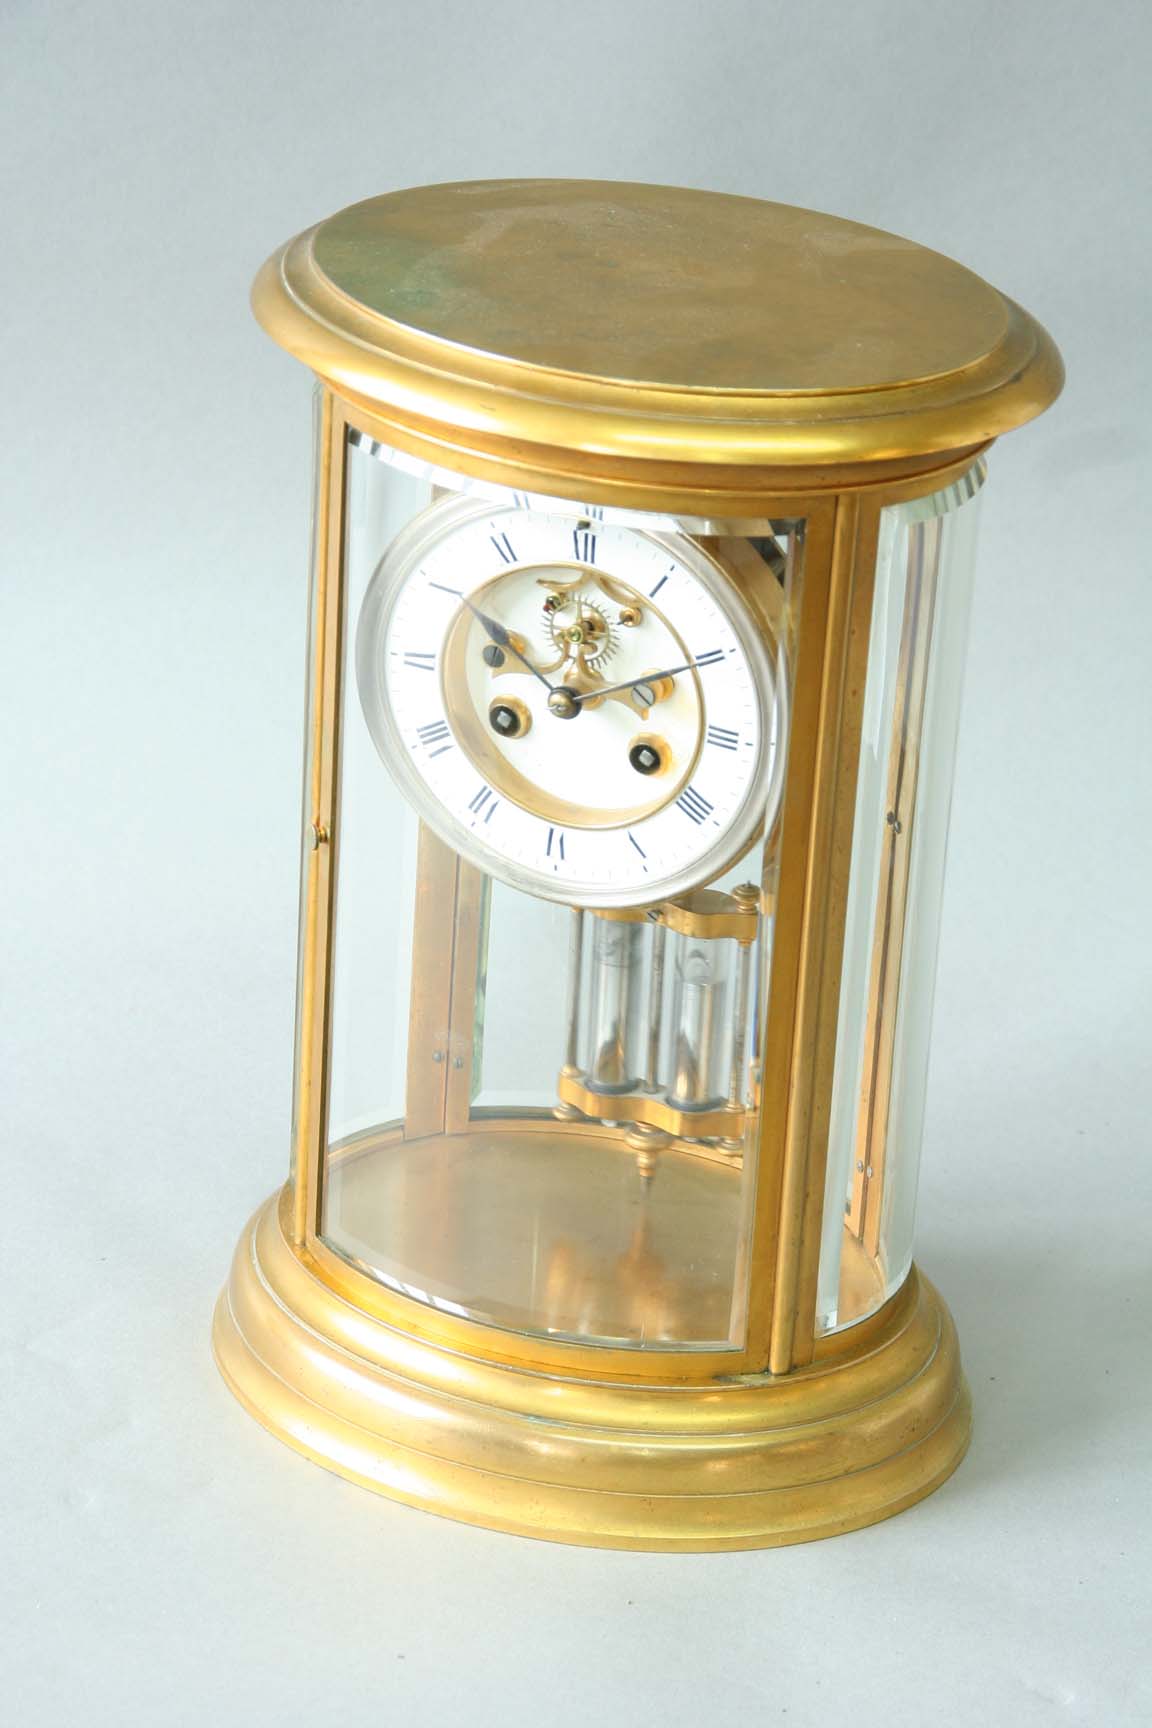 AN ORMOLU OVAL FOUR GLASS MANTEL CLOCK dial white enamel, movement drum, exposed escapement with